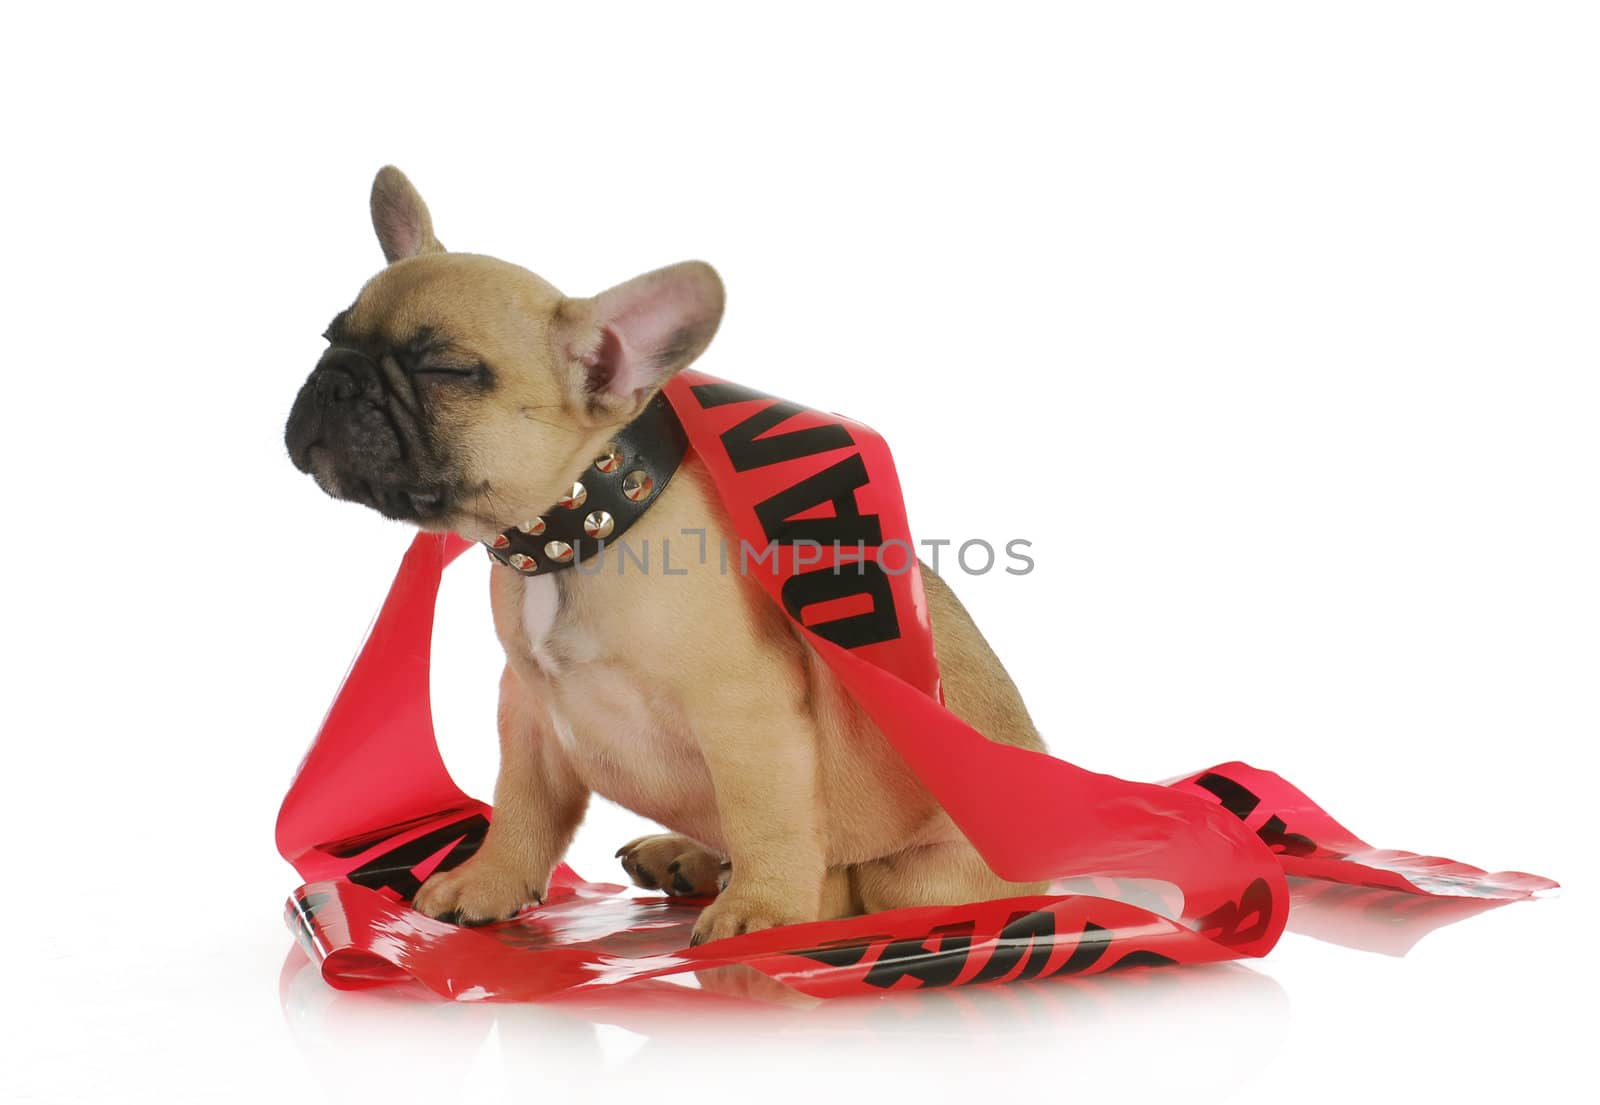 naughty dog - french bulldog with silly expression wrapped in danger tape - 8 weeks old